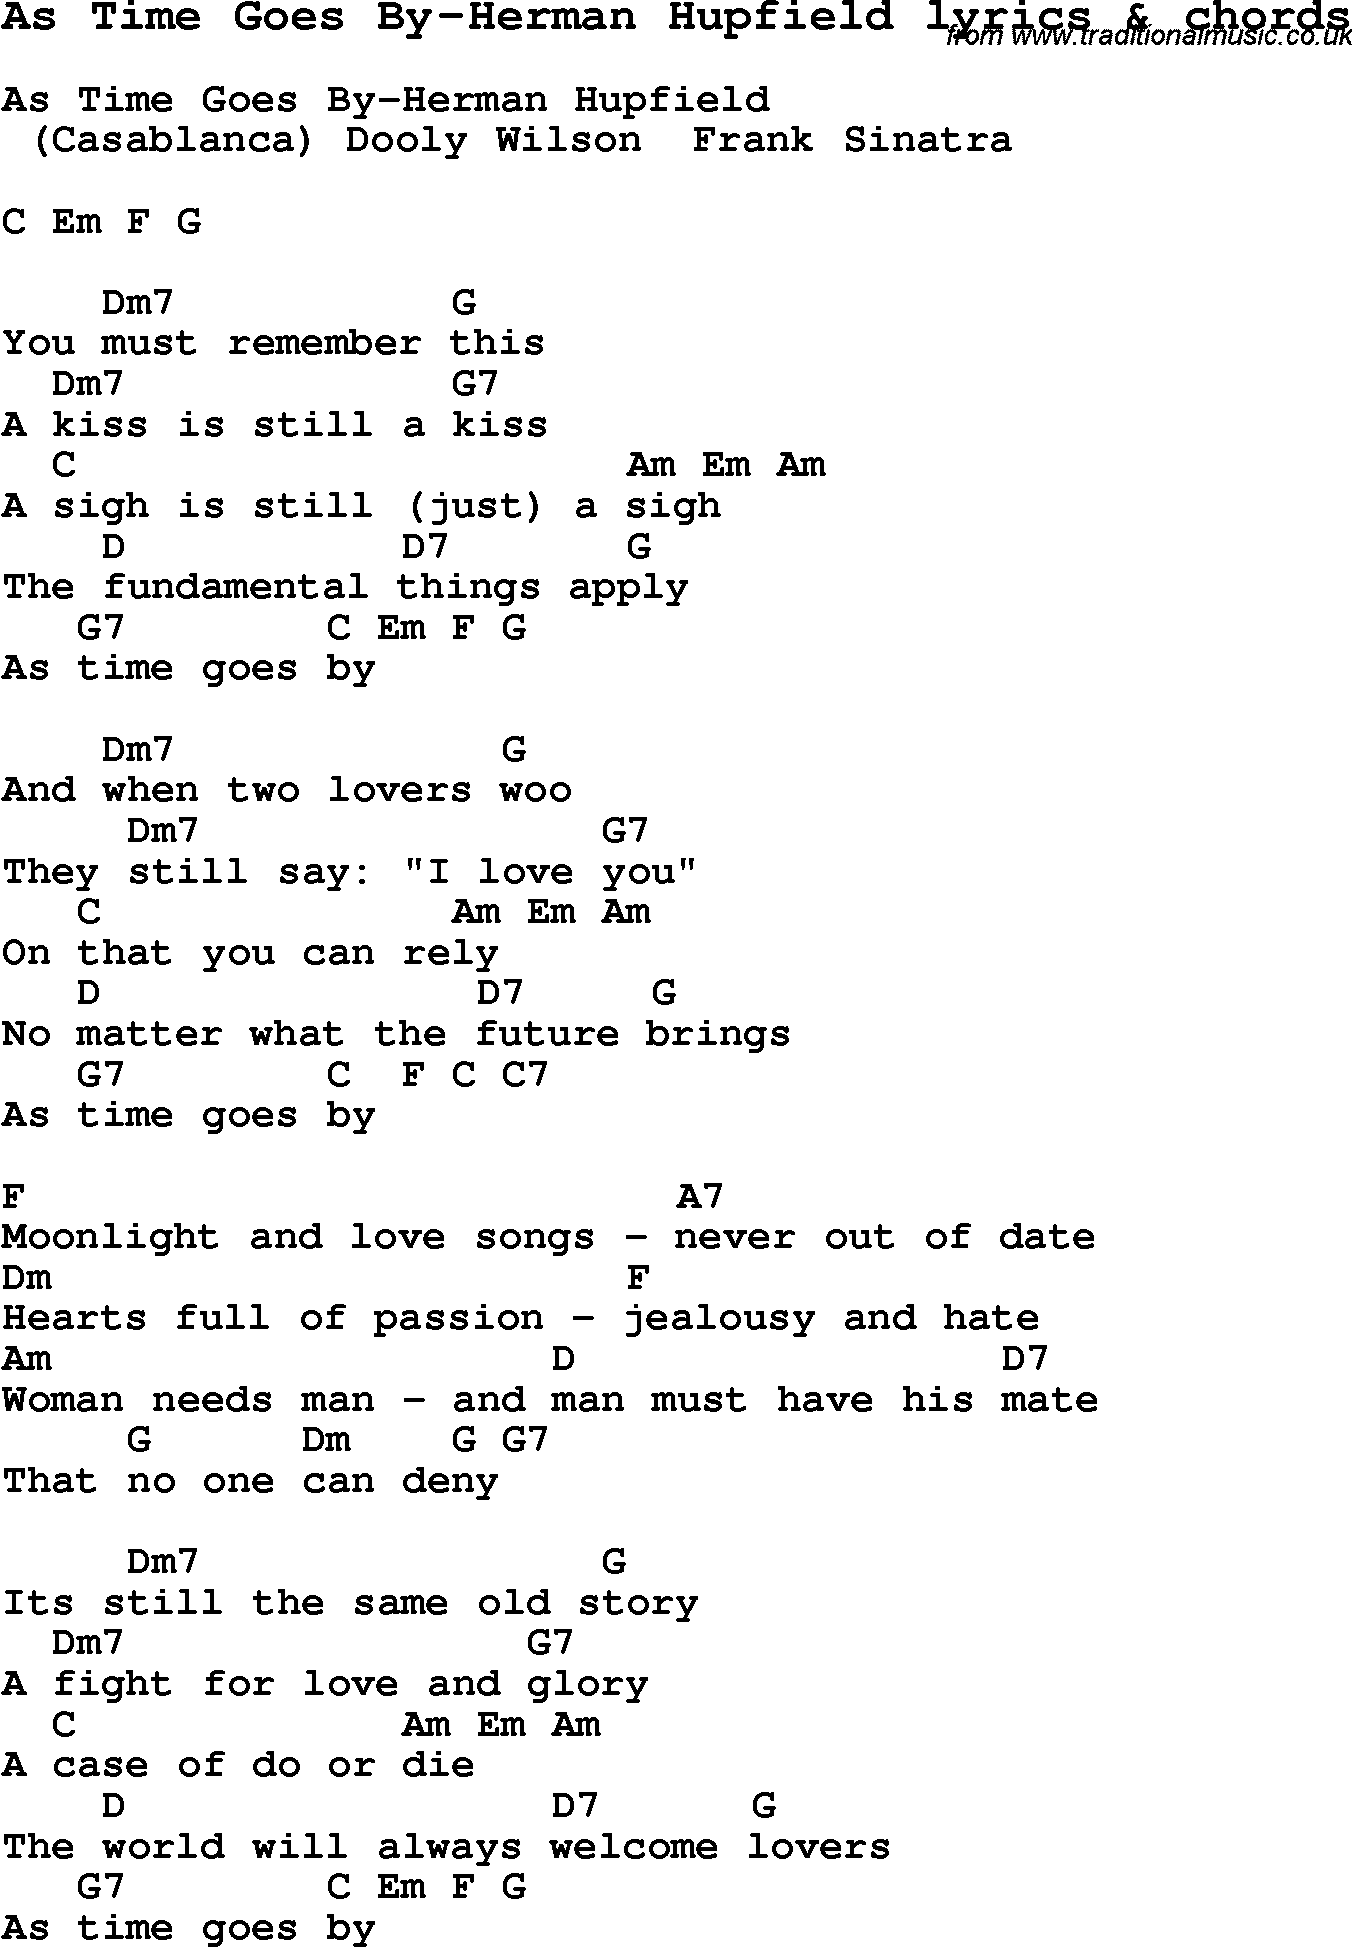 Love Song Lyrics for: As Time Goes By-Herman Hupfield with chords for Ukulele, Guitar Banjo etc.